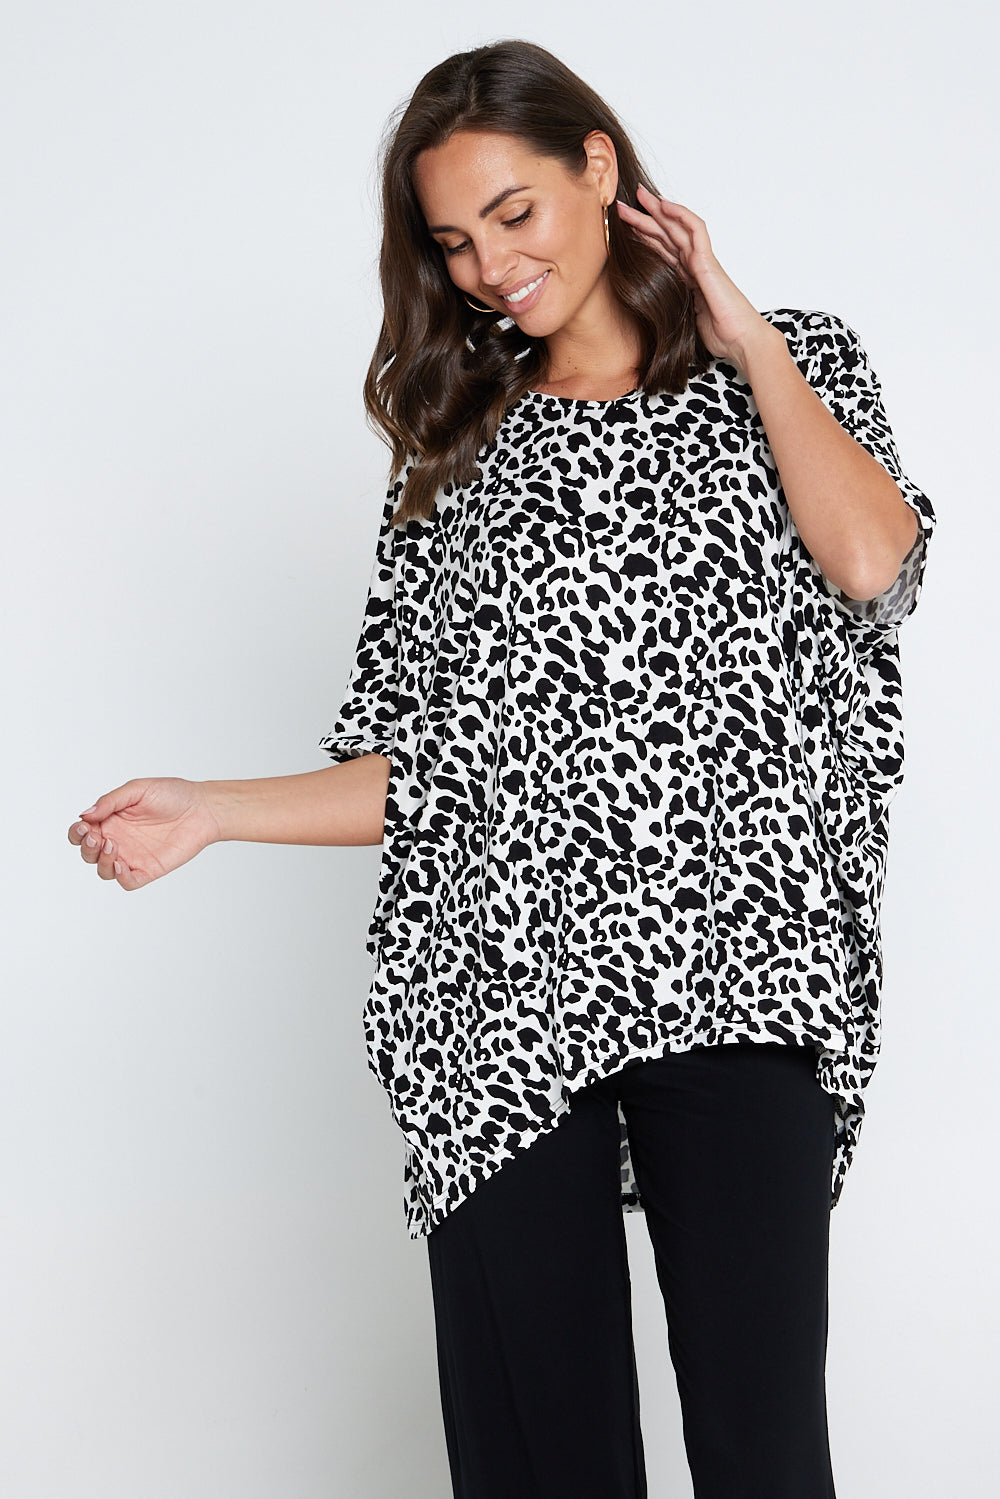 Image of Claire Bamboo Top - Black/White Animal